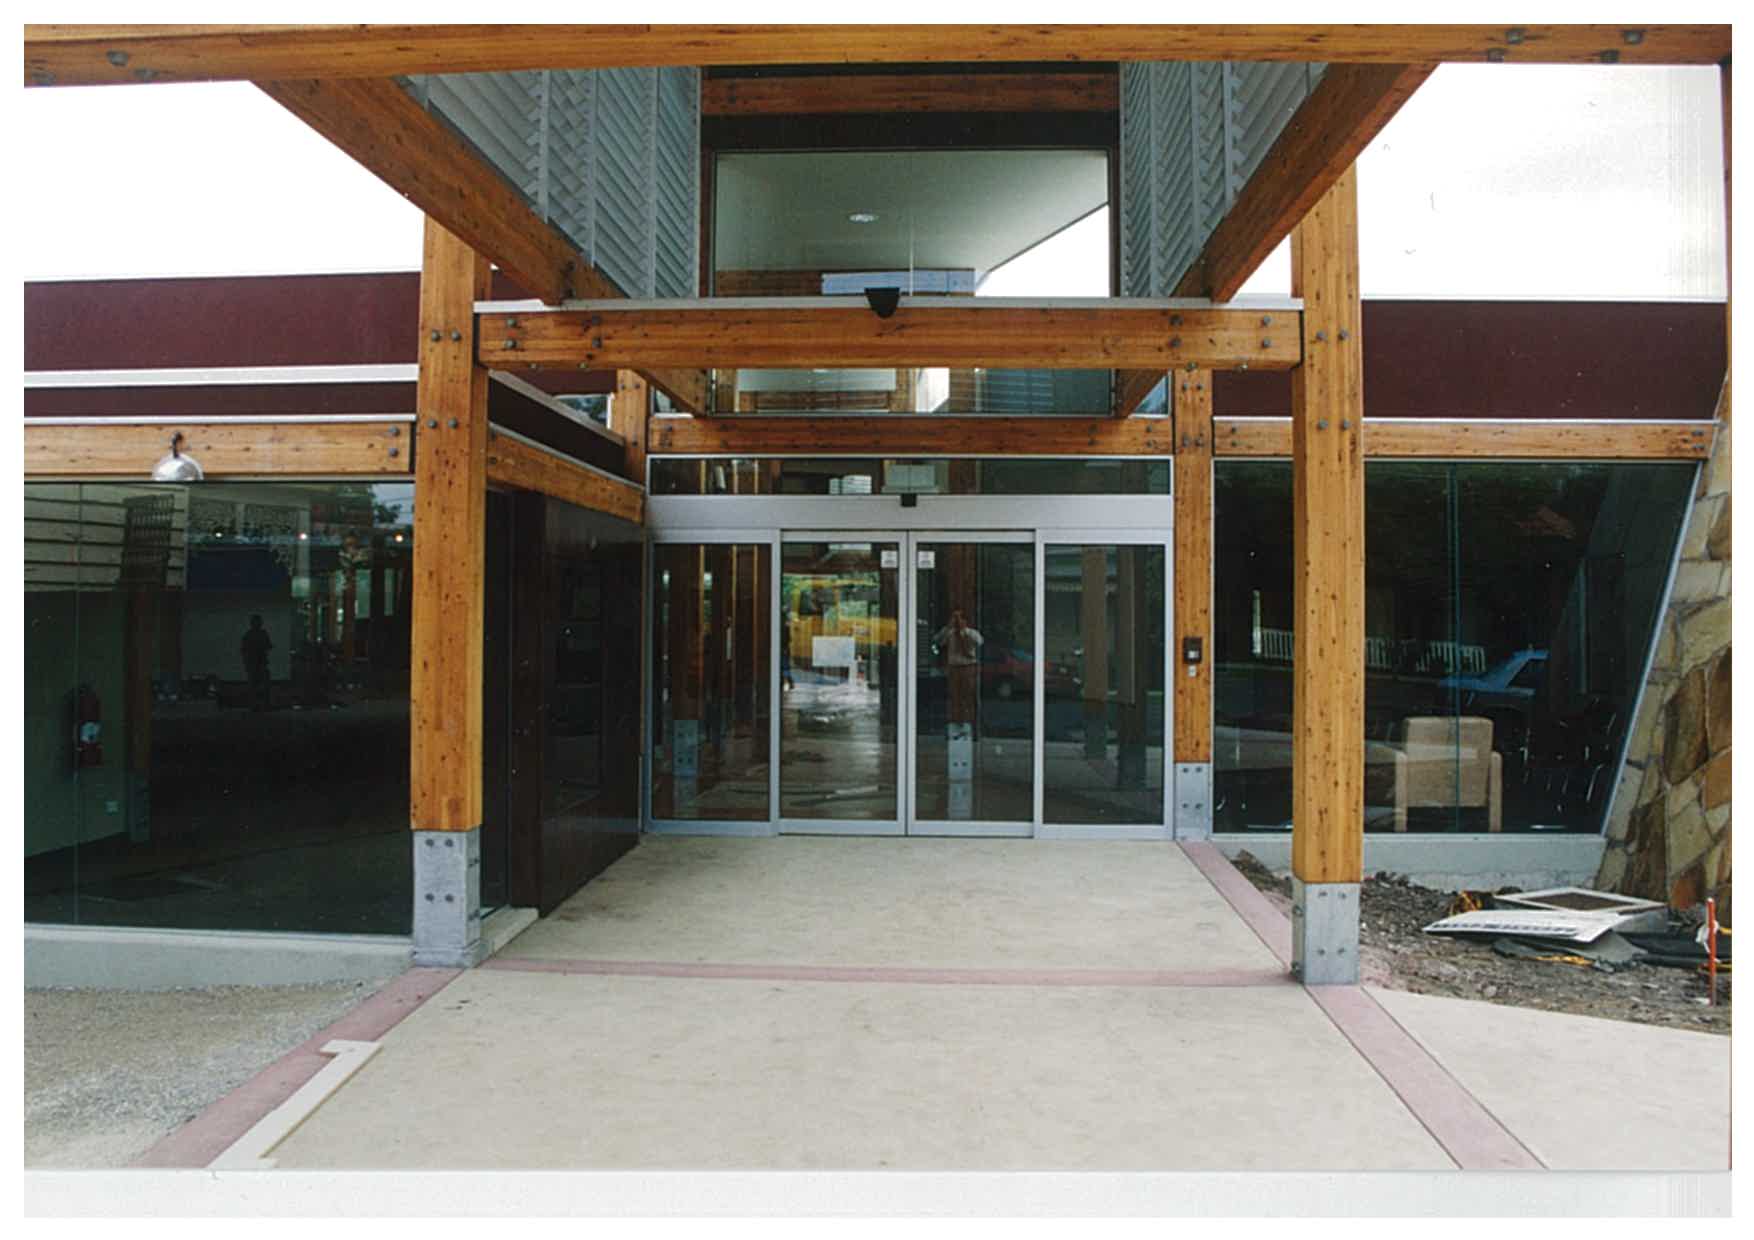 Image of Fairfield Library exterior before opening 1999